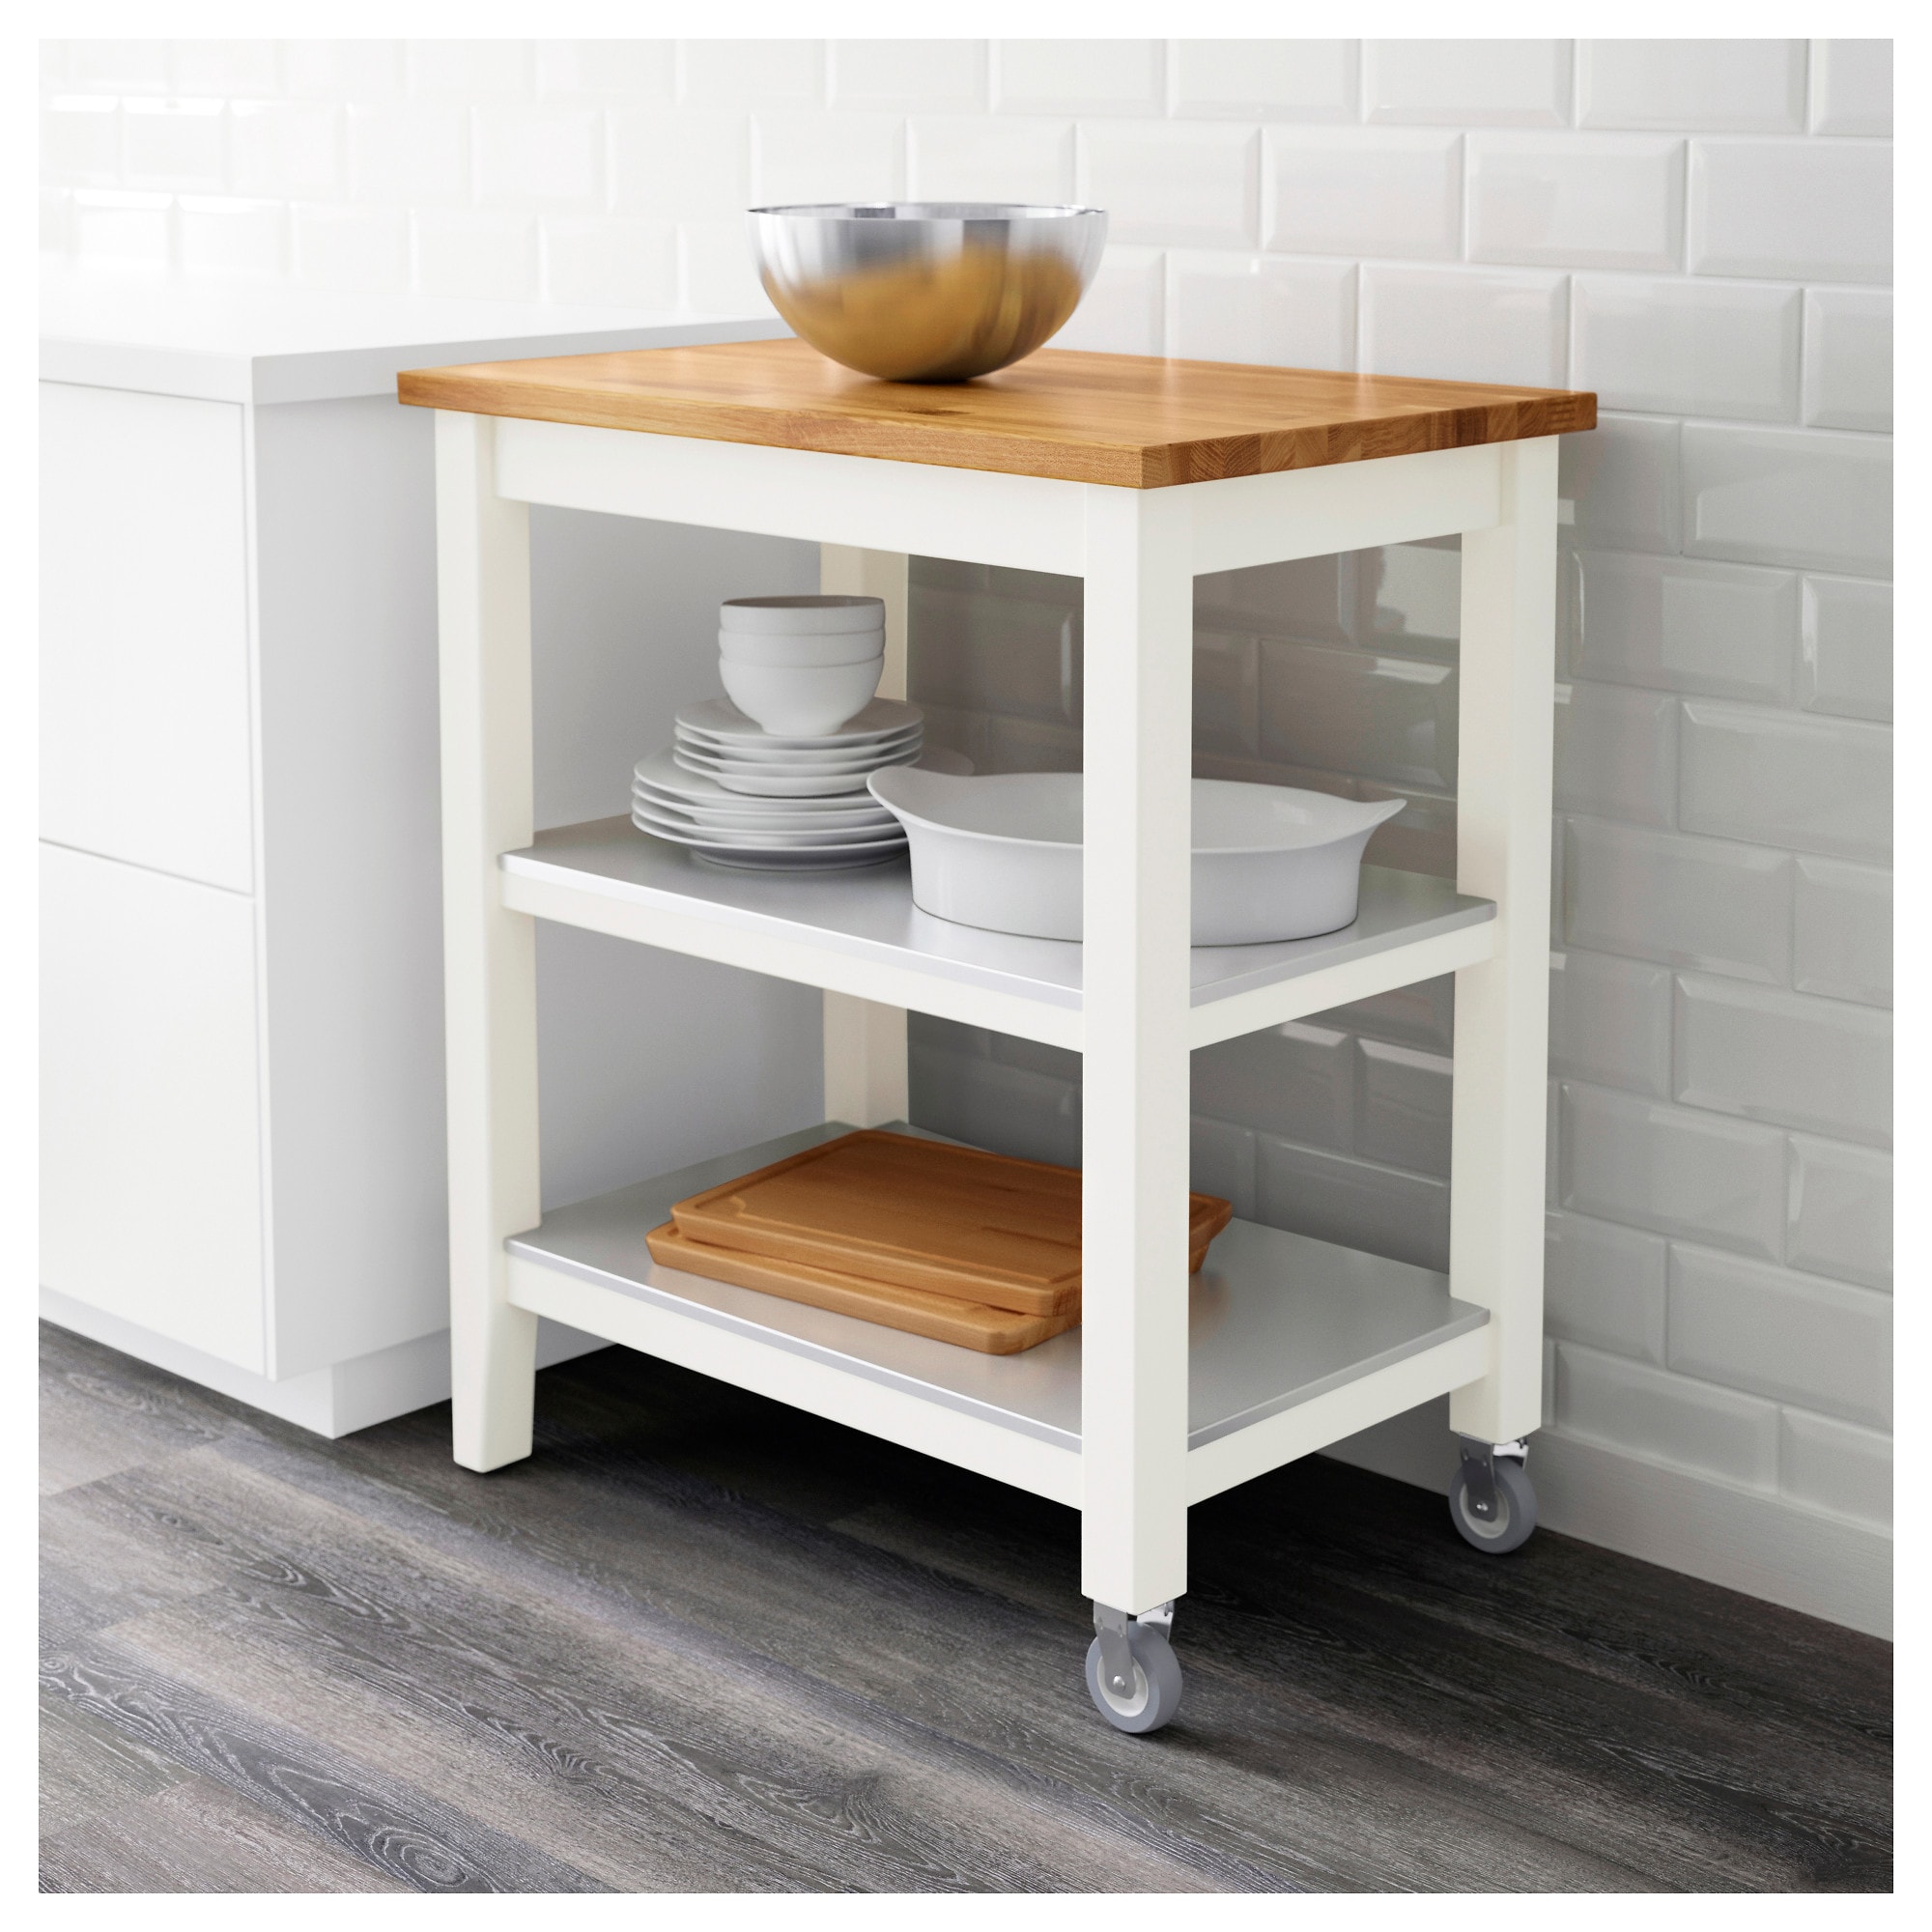 ikea stenstorp kitchen trolley offers you additional storage space in your kitchen.  GXCLYFB